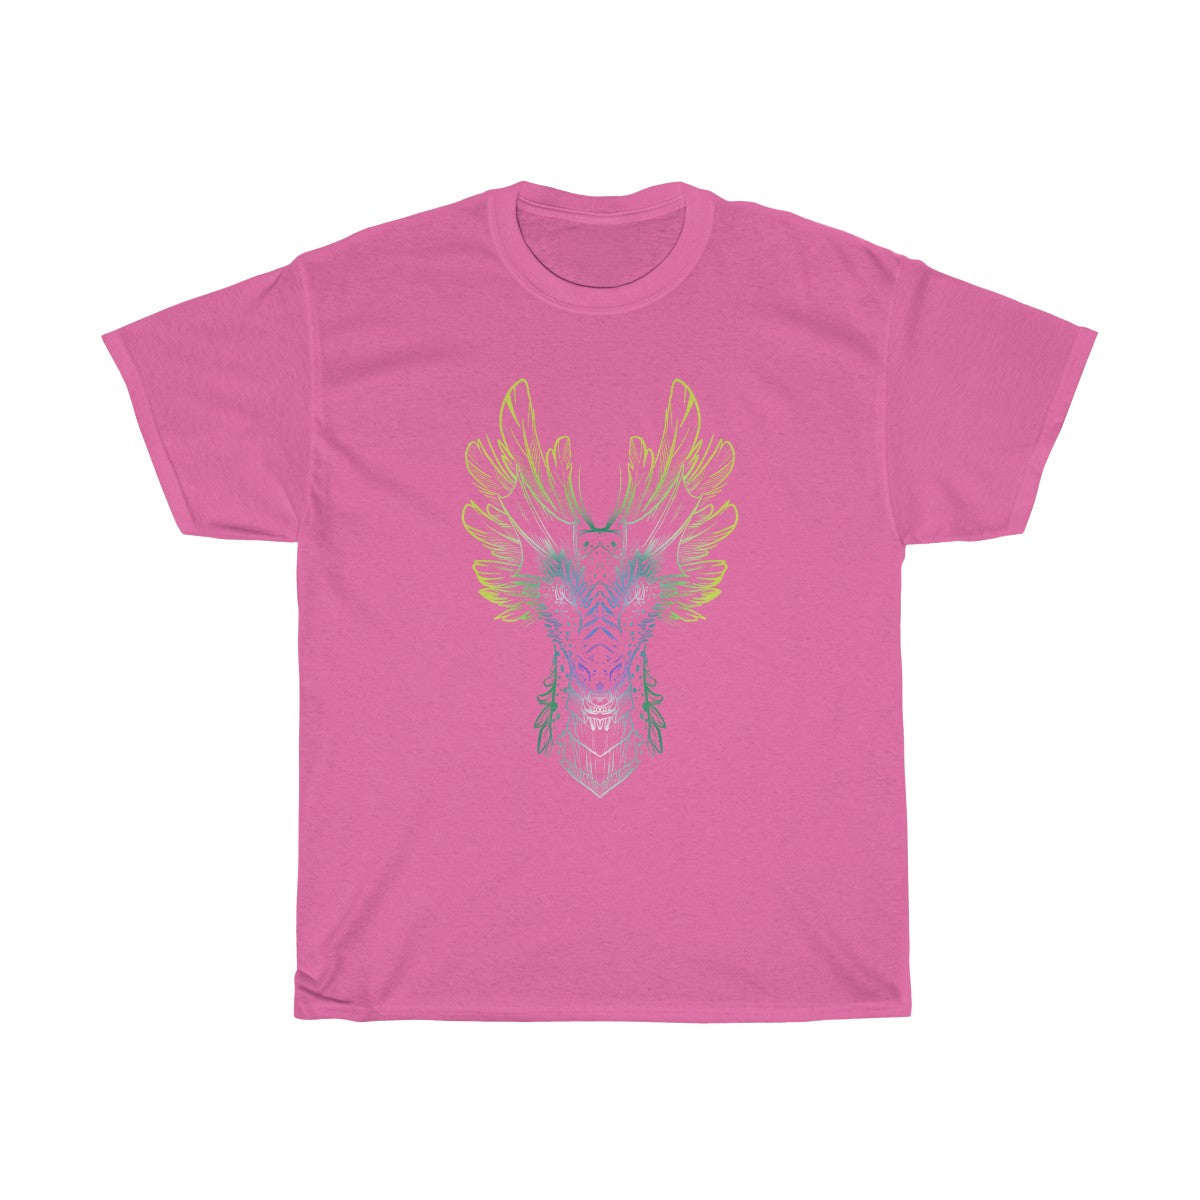 Drake Colored - T-Shirt T-Shirt Dire Creatures Pink S 